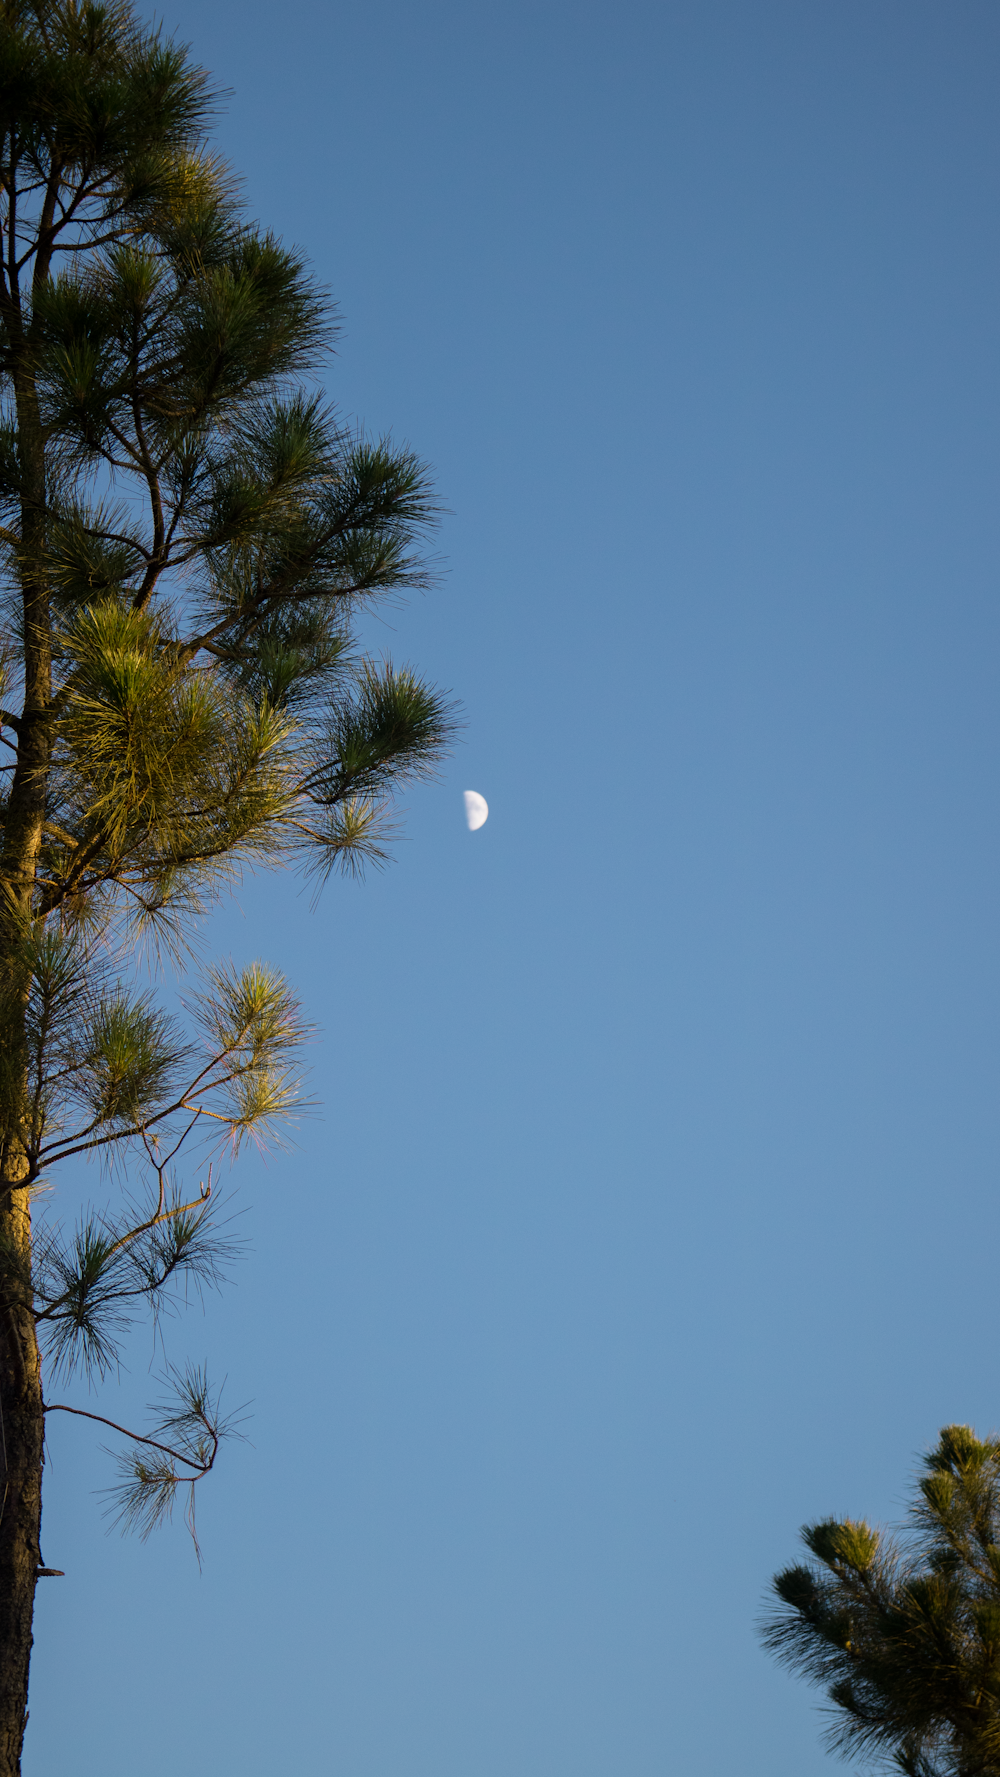 the moon is seen through the branches of a pine tree